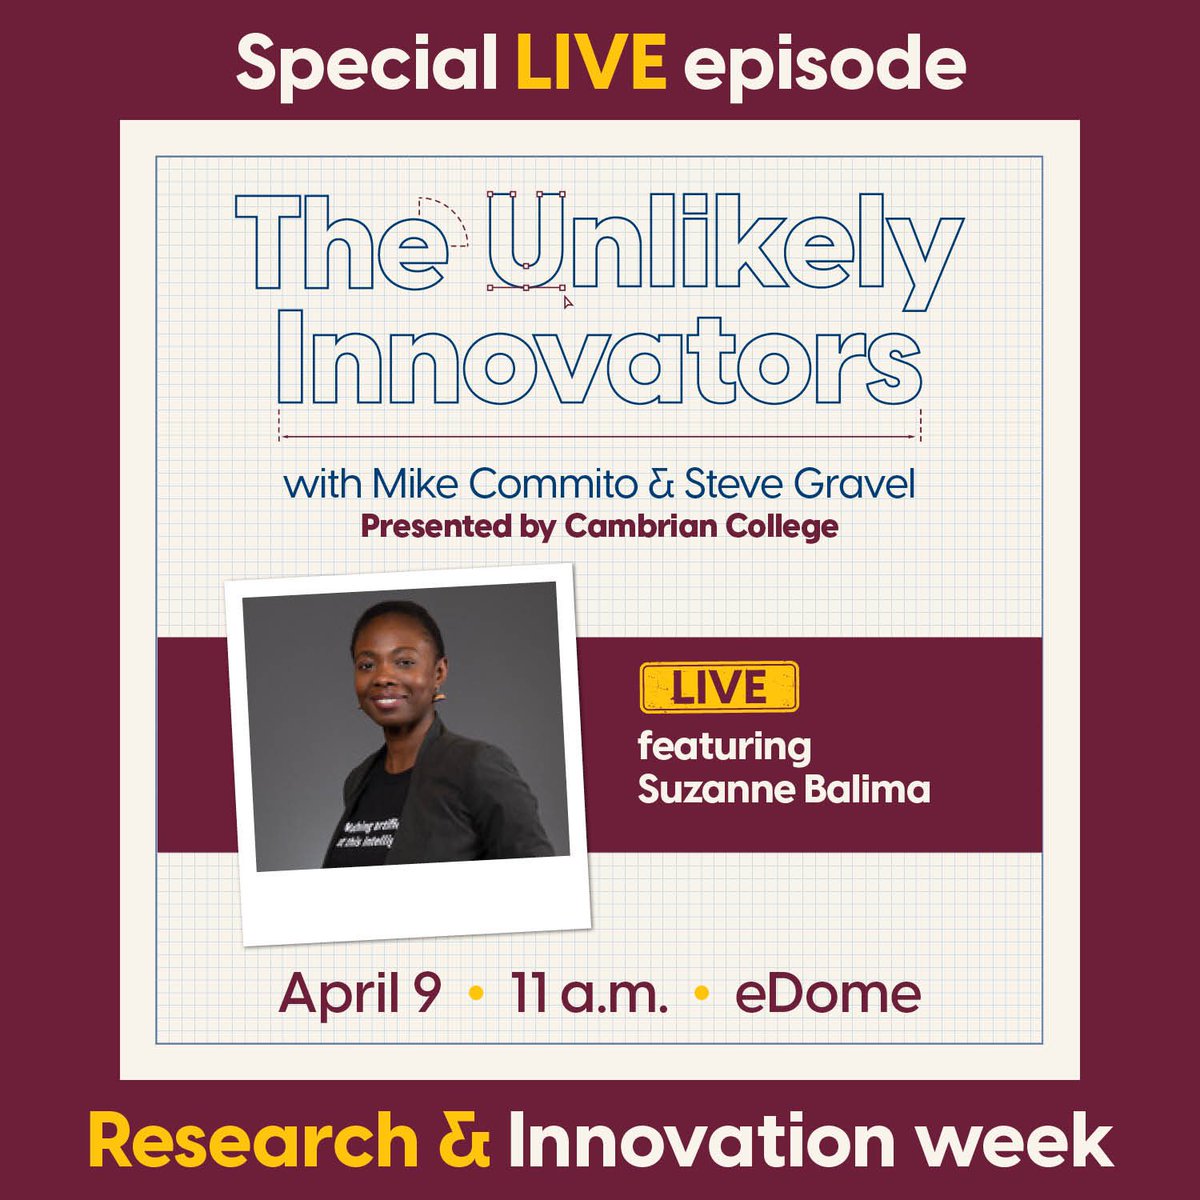 So excited to chat with Suzanne Balima from Vale Base Metals this morning! Join us in the eDome @cambriancollege at 11am for a live recording of the Unlikely Innovators as part of Research & Innovation Week ✨